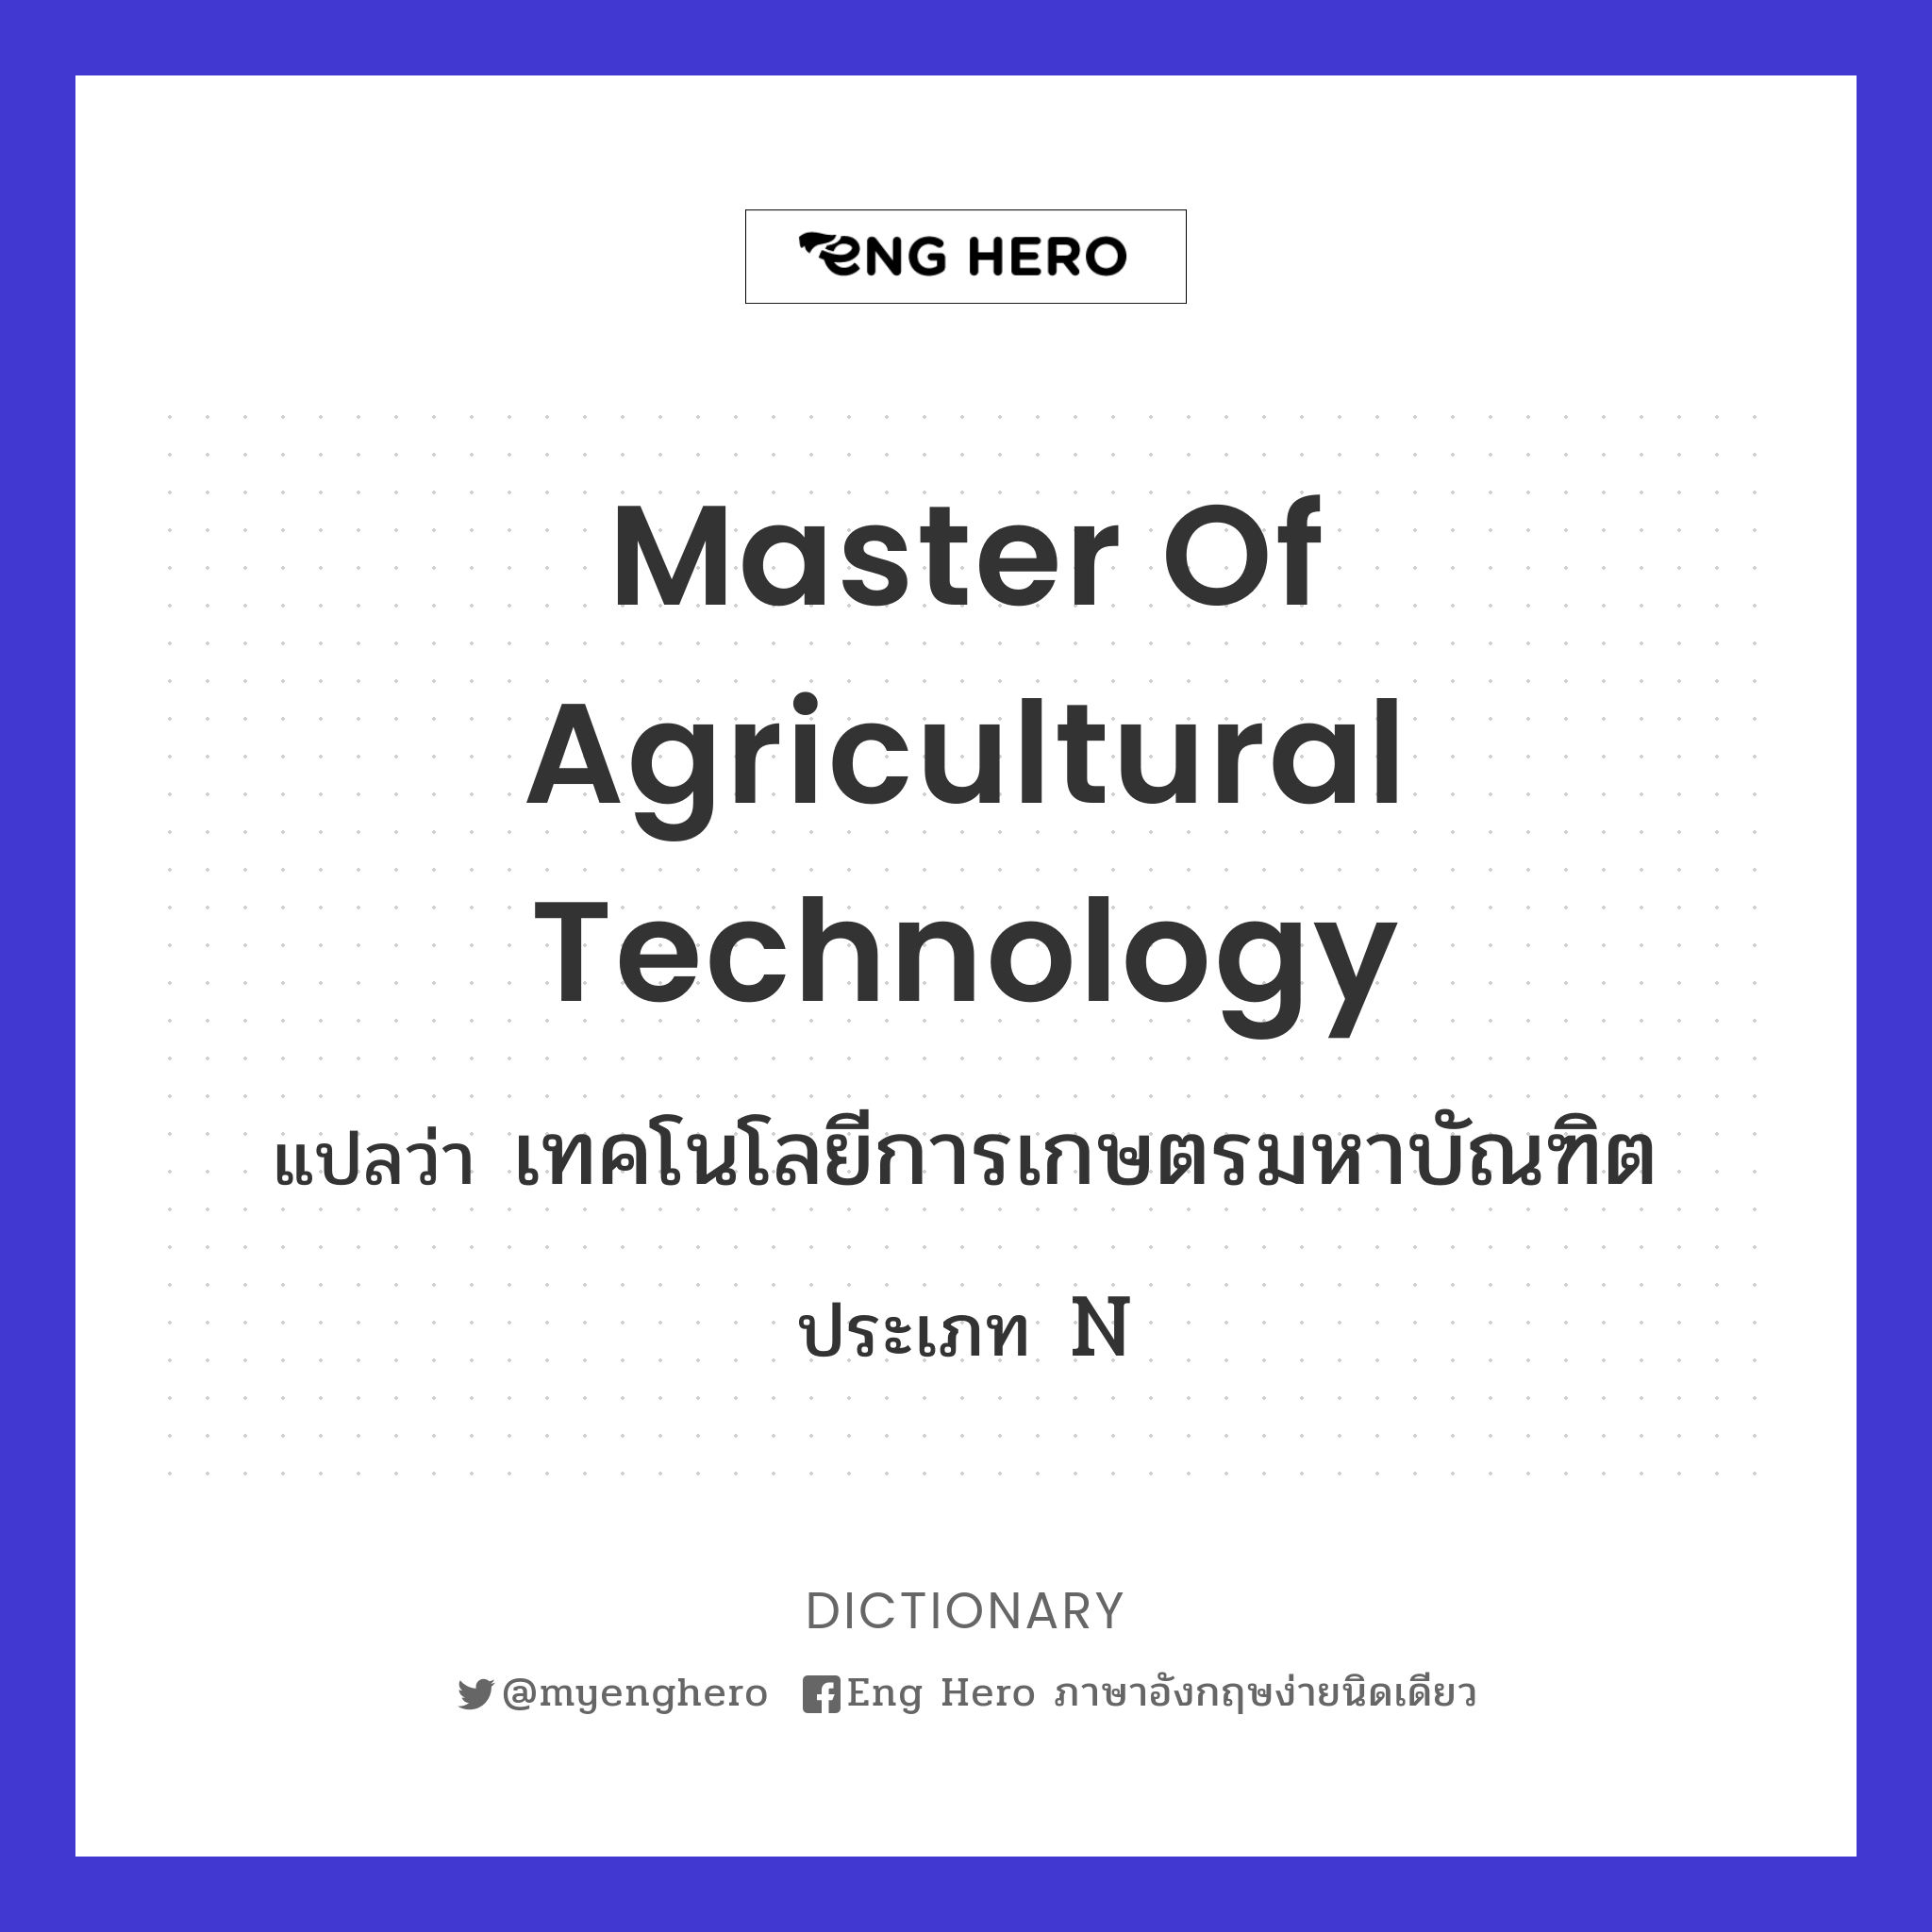 Master of Agricultural Technology